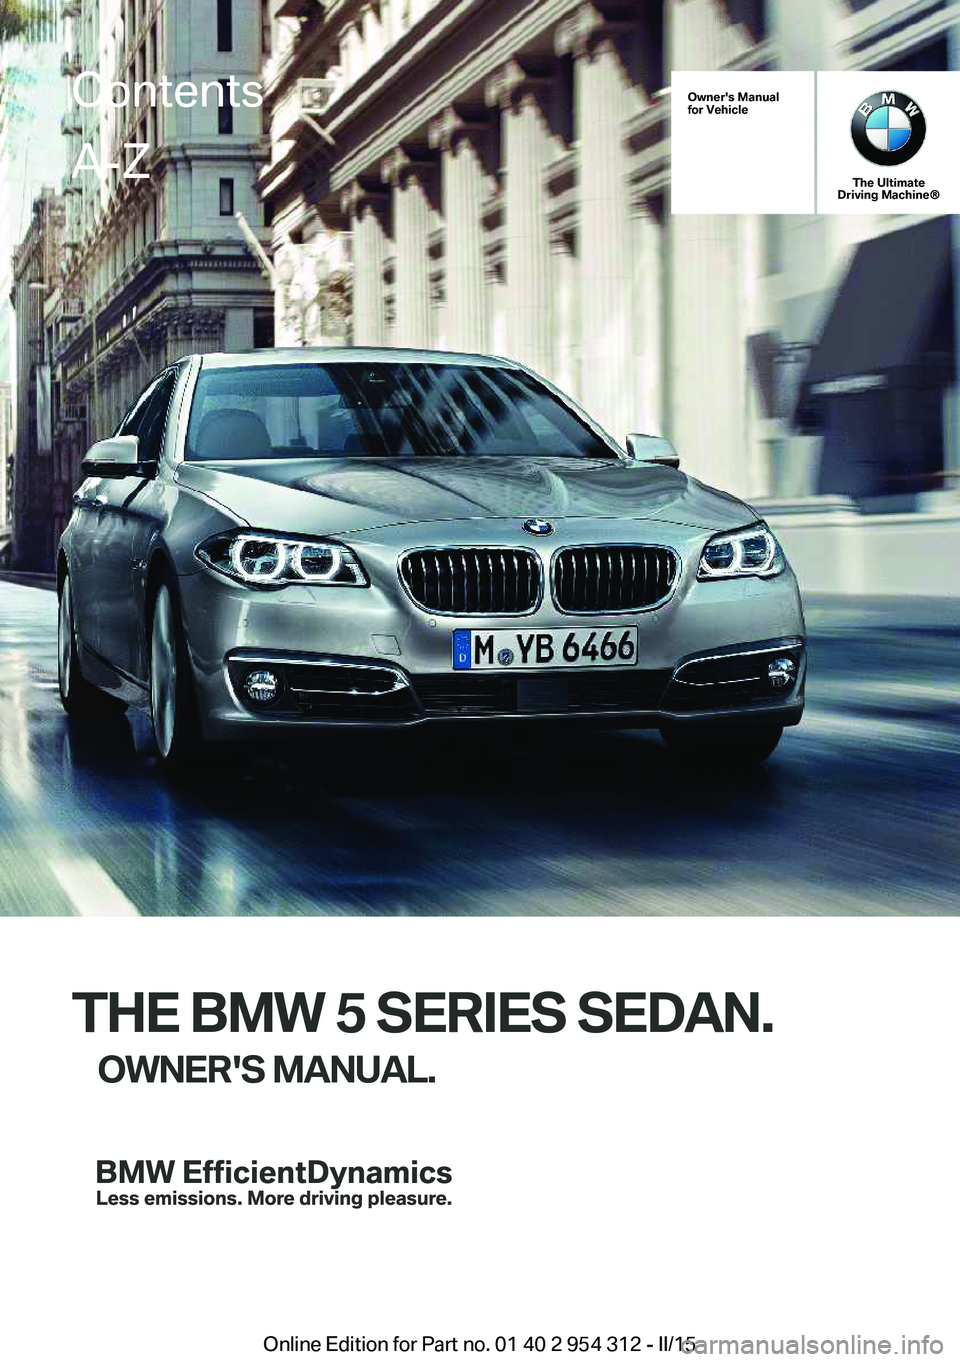 BMW 528I SEDAN 2015  Owners Manual Owner's Manual
for Vehicle
The Ultimate
Driving Machine®
THE BMW 5 SERIES SEDAN.
OWNER'S MANUAL.
ContentsA-Z
Online Edition for Part no. 01 40 2 954 312 - II/15   